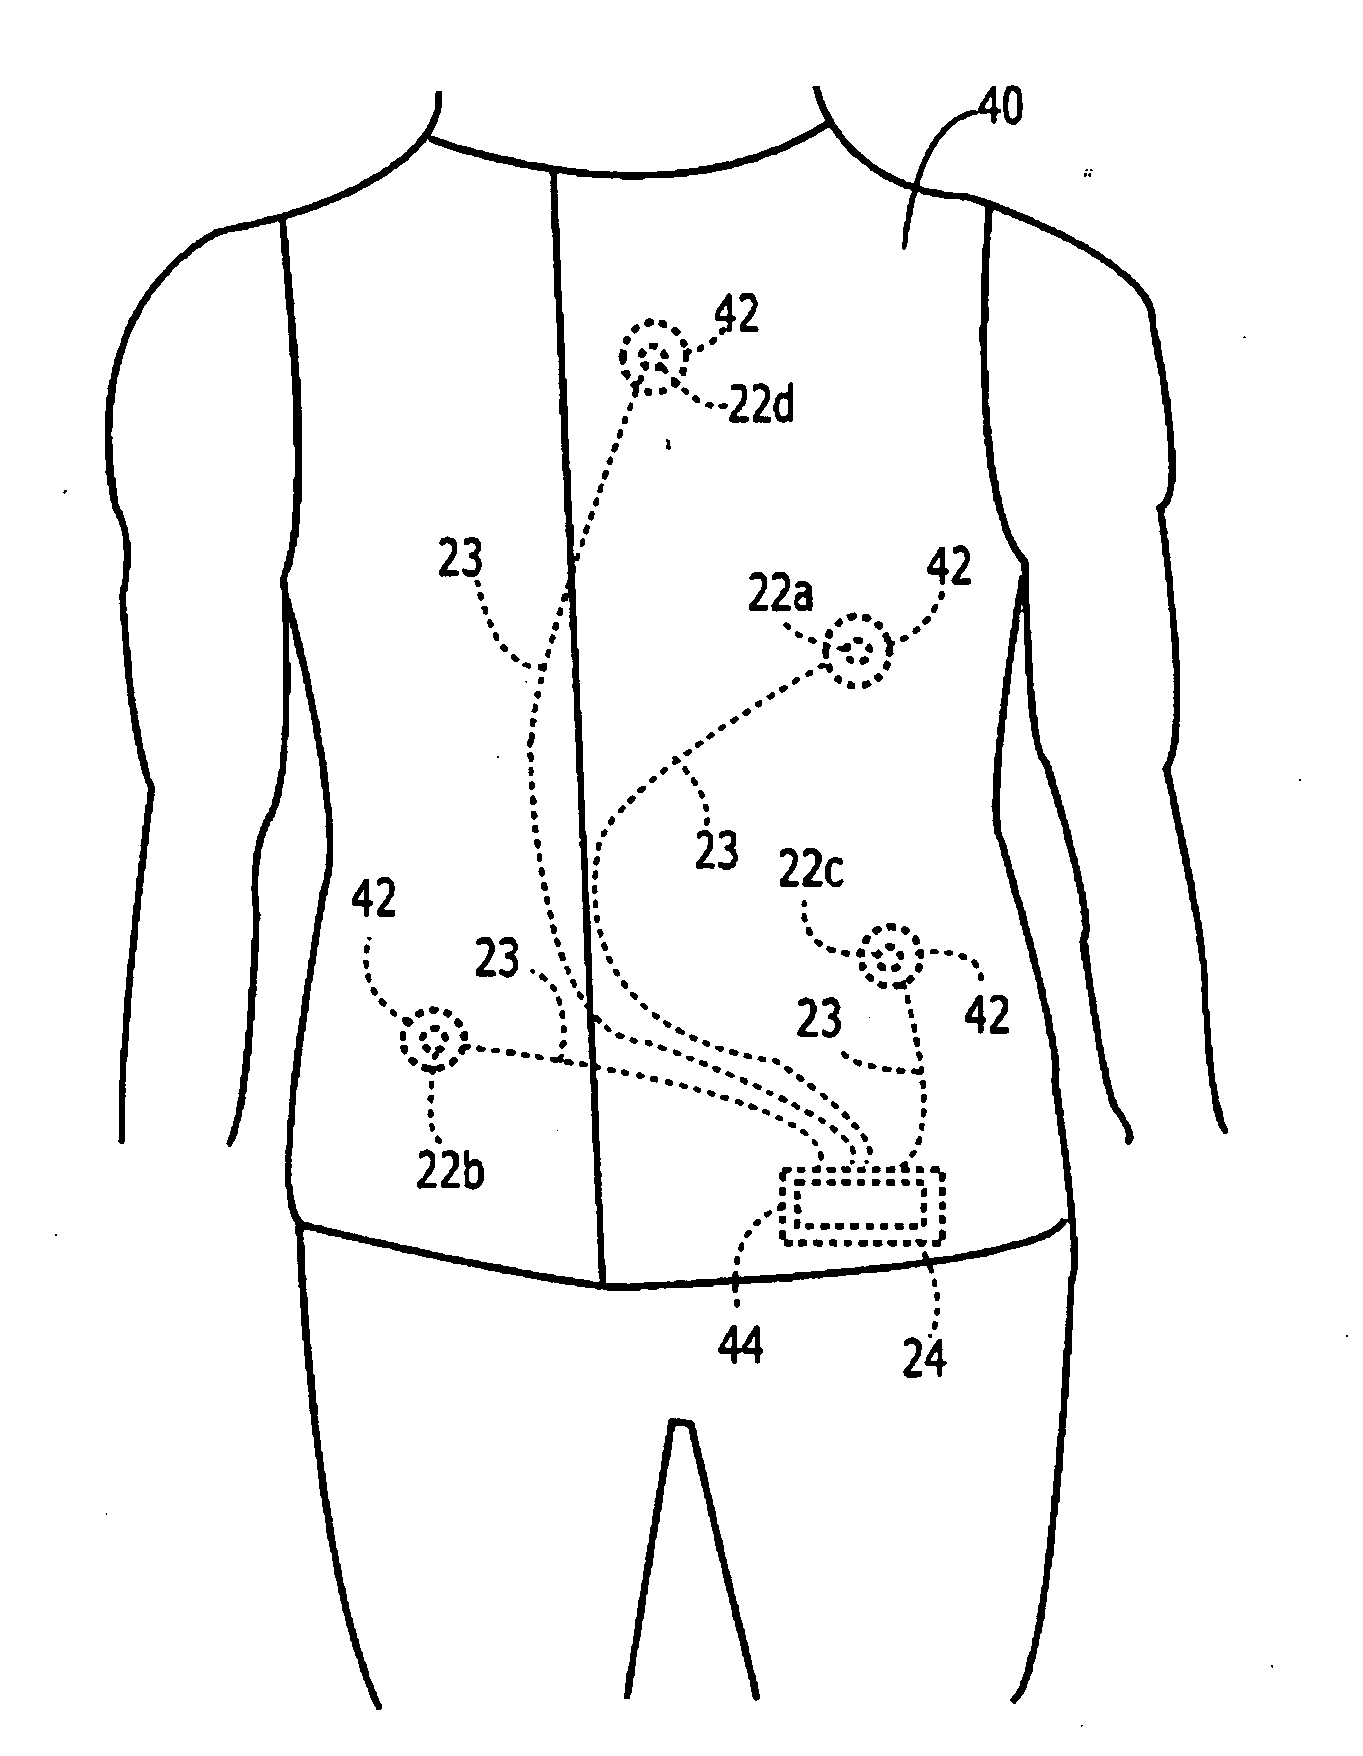 Method and System for Monitoring Gastrointestinal Function and Physiological Characteristics